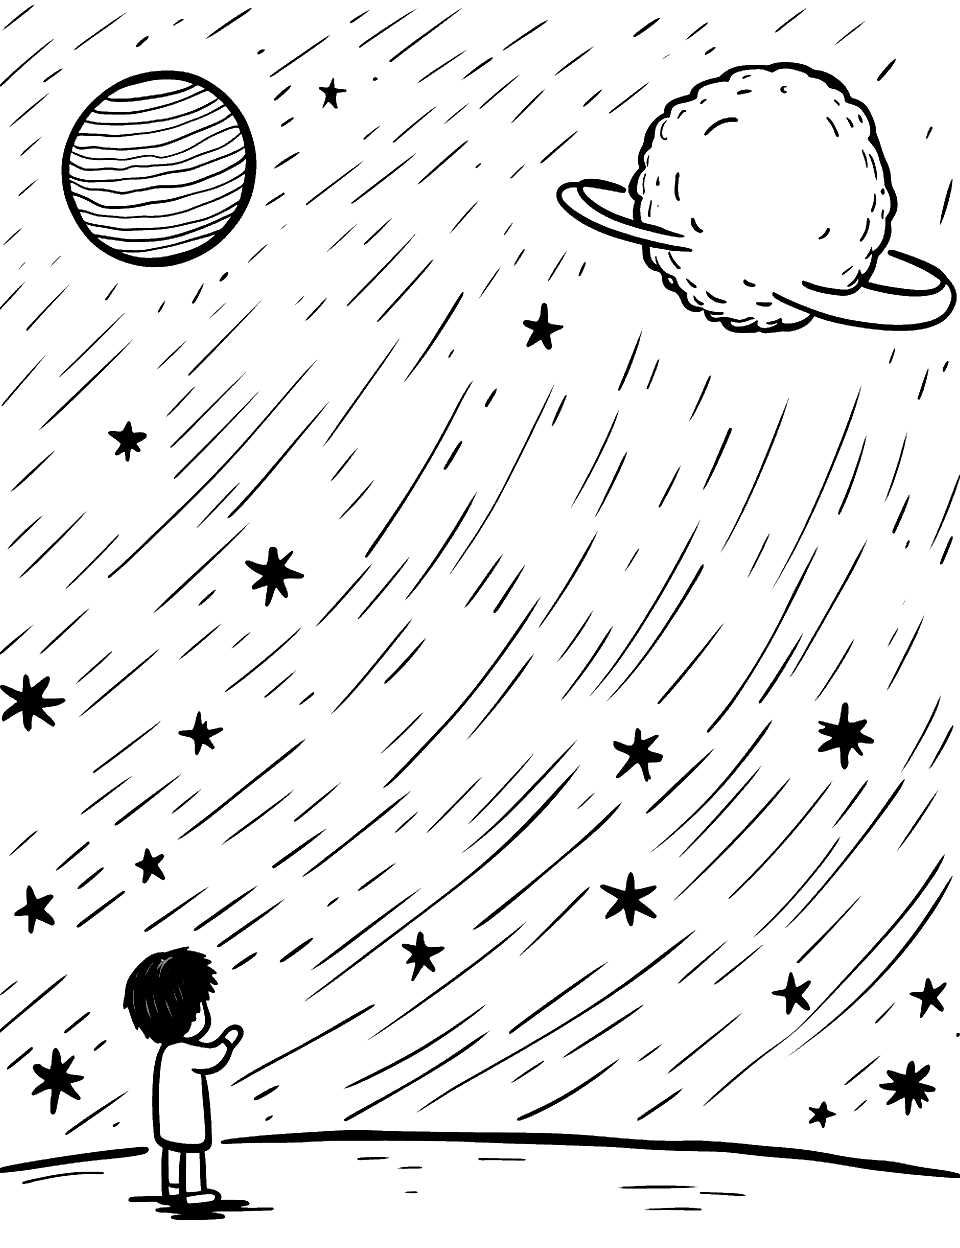 Meteor Shower Solar System Coloring Page - A scene of a meteor shower with streaks of light in the sky.